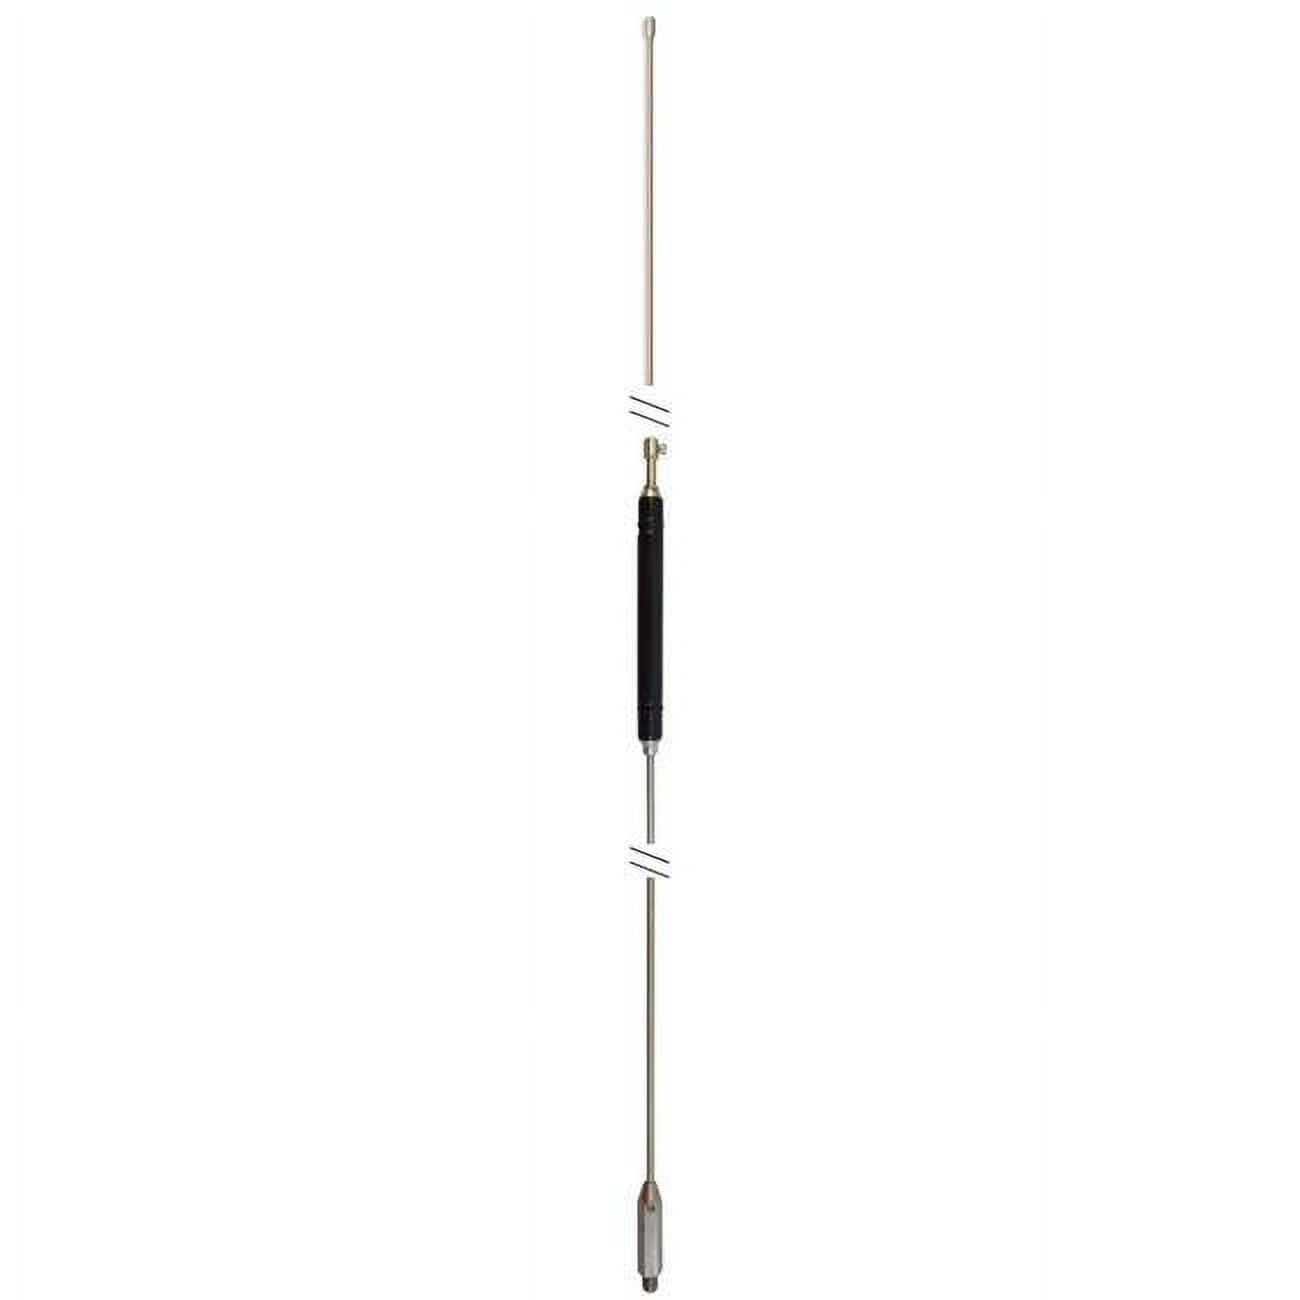 Picture of Hustler HQ27MAGNUM 55 in. Heavy Duty Center Load Stainless Steel CB Antenna